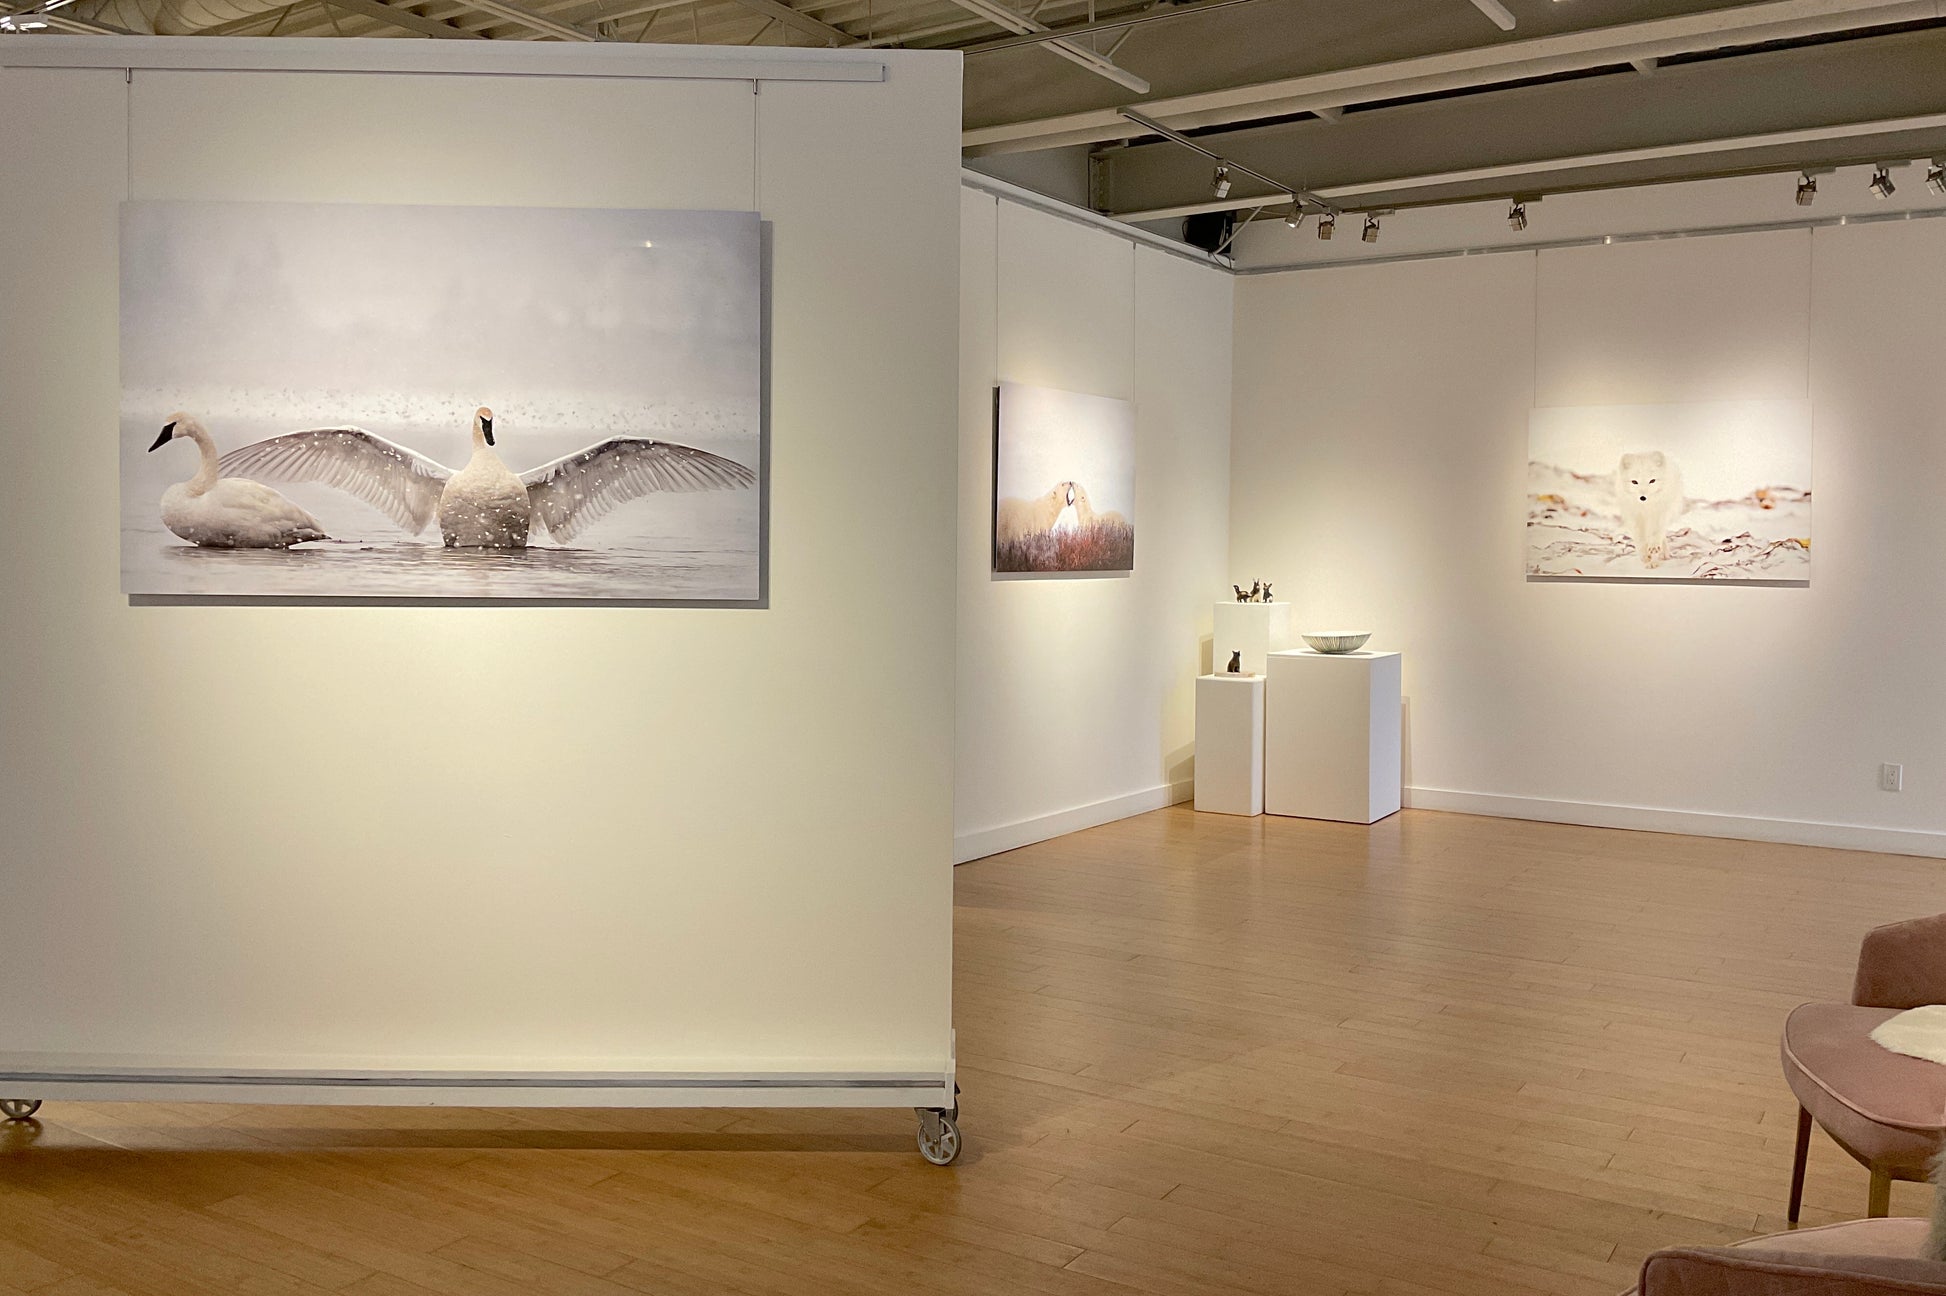 Trumpeter Swans by Michelle Valberg, "Eye to Eye" exhibition at Wall Space Gallery